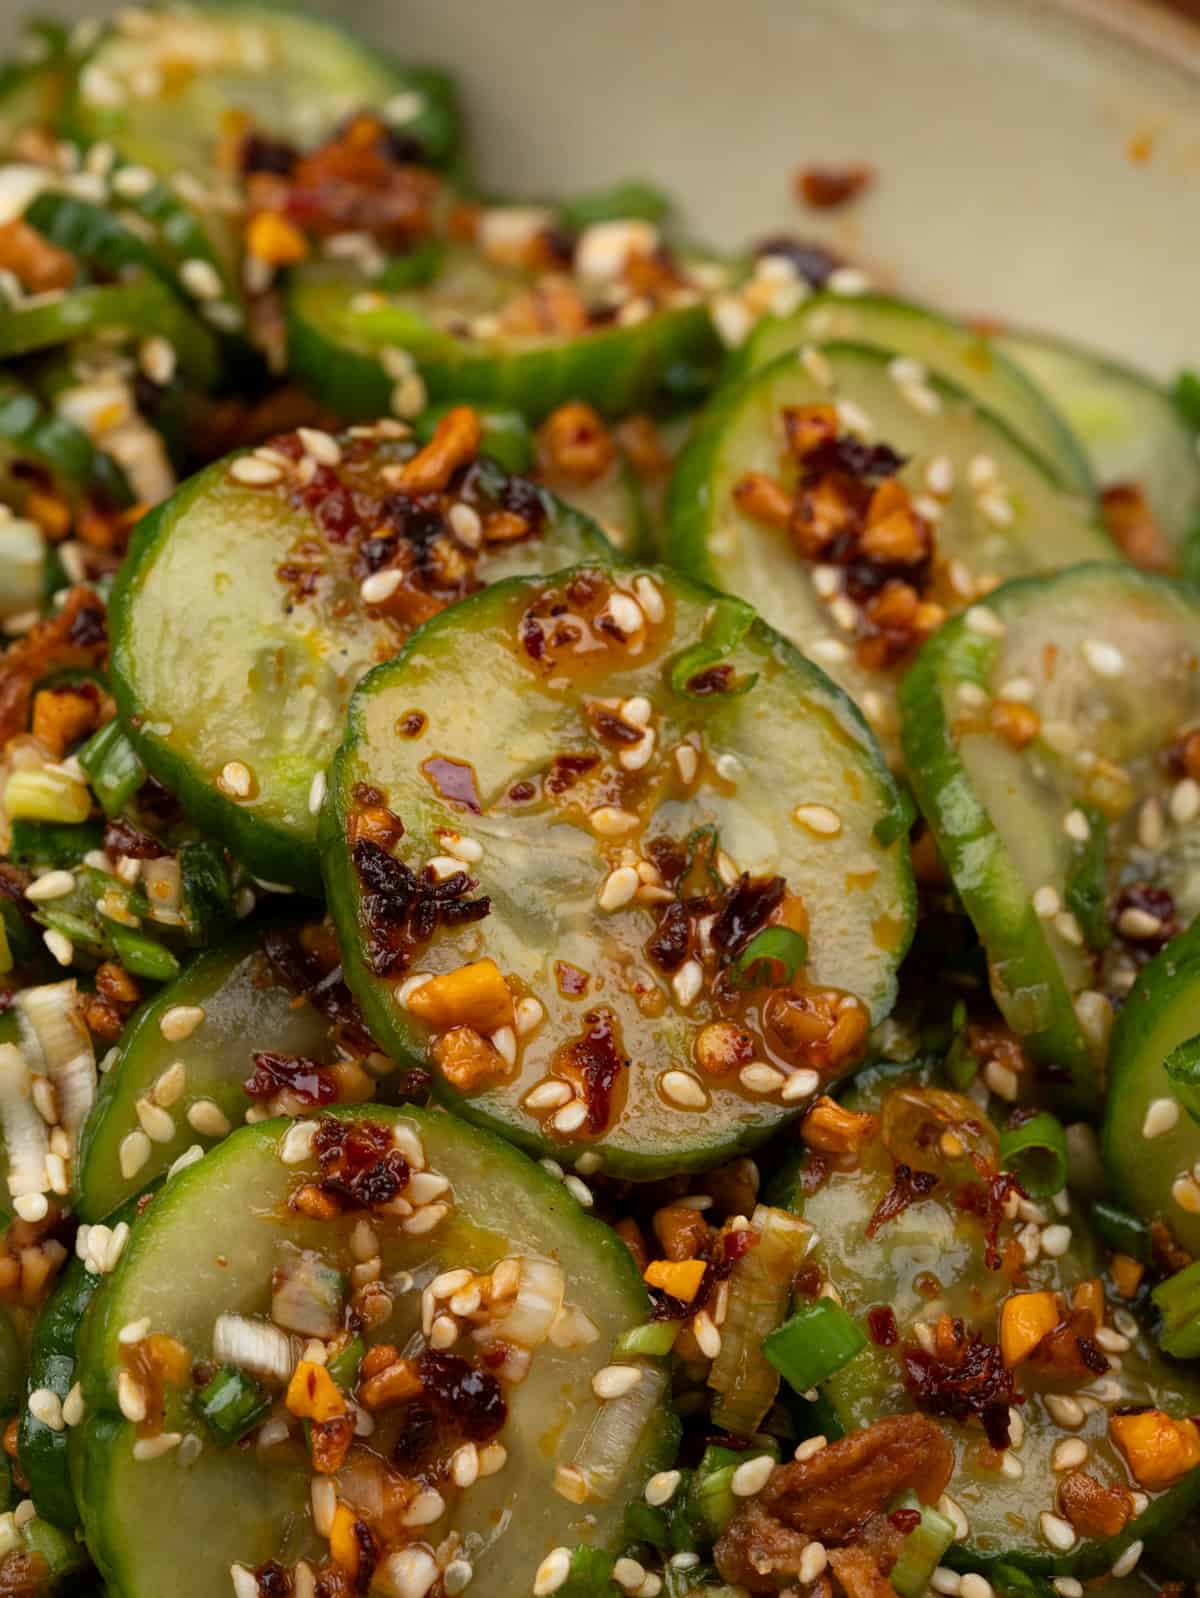 Sliced cucumbers, green onion tossed in a Asian inspired dressing, chilli crisp and toasted sesame seeds.